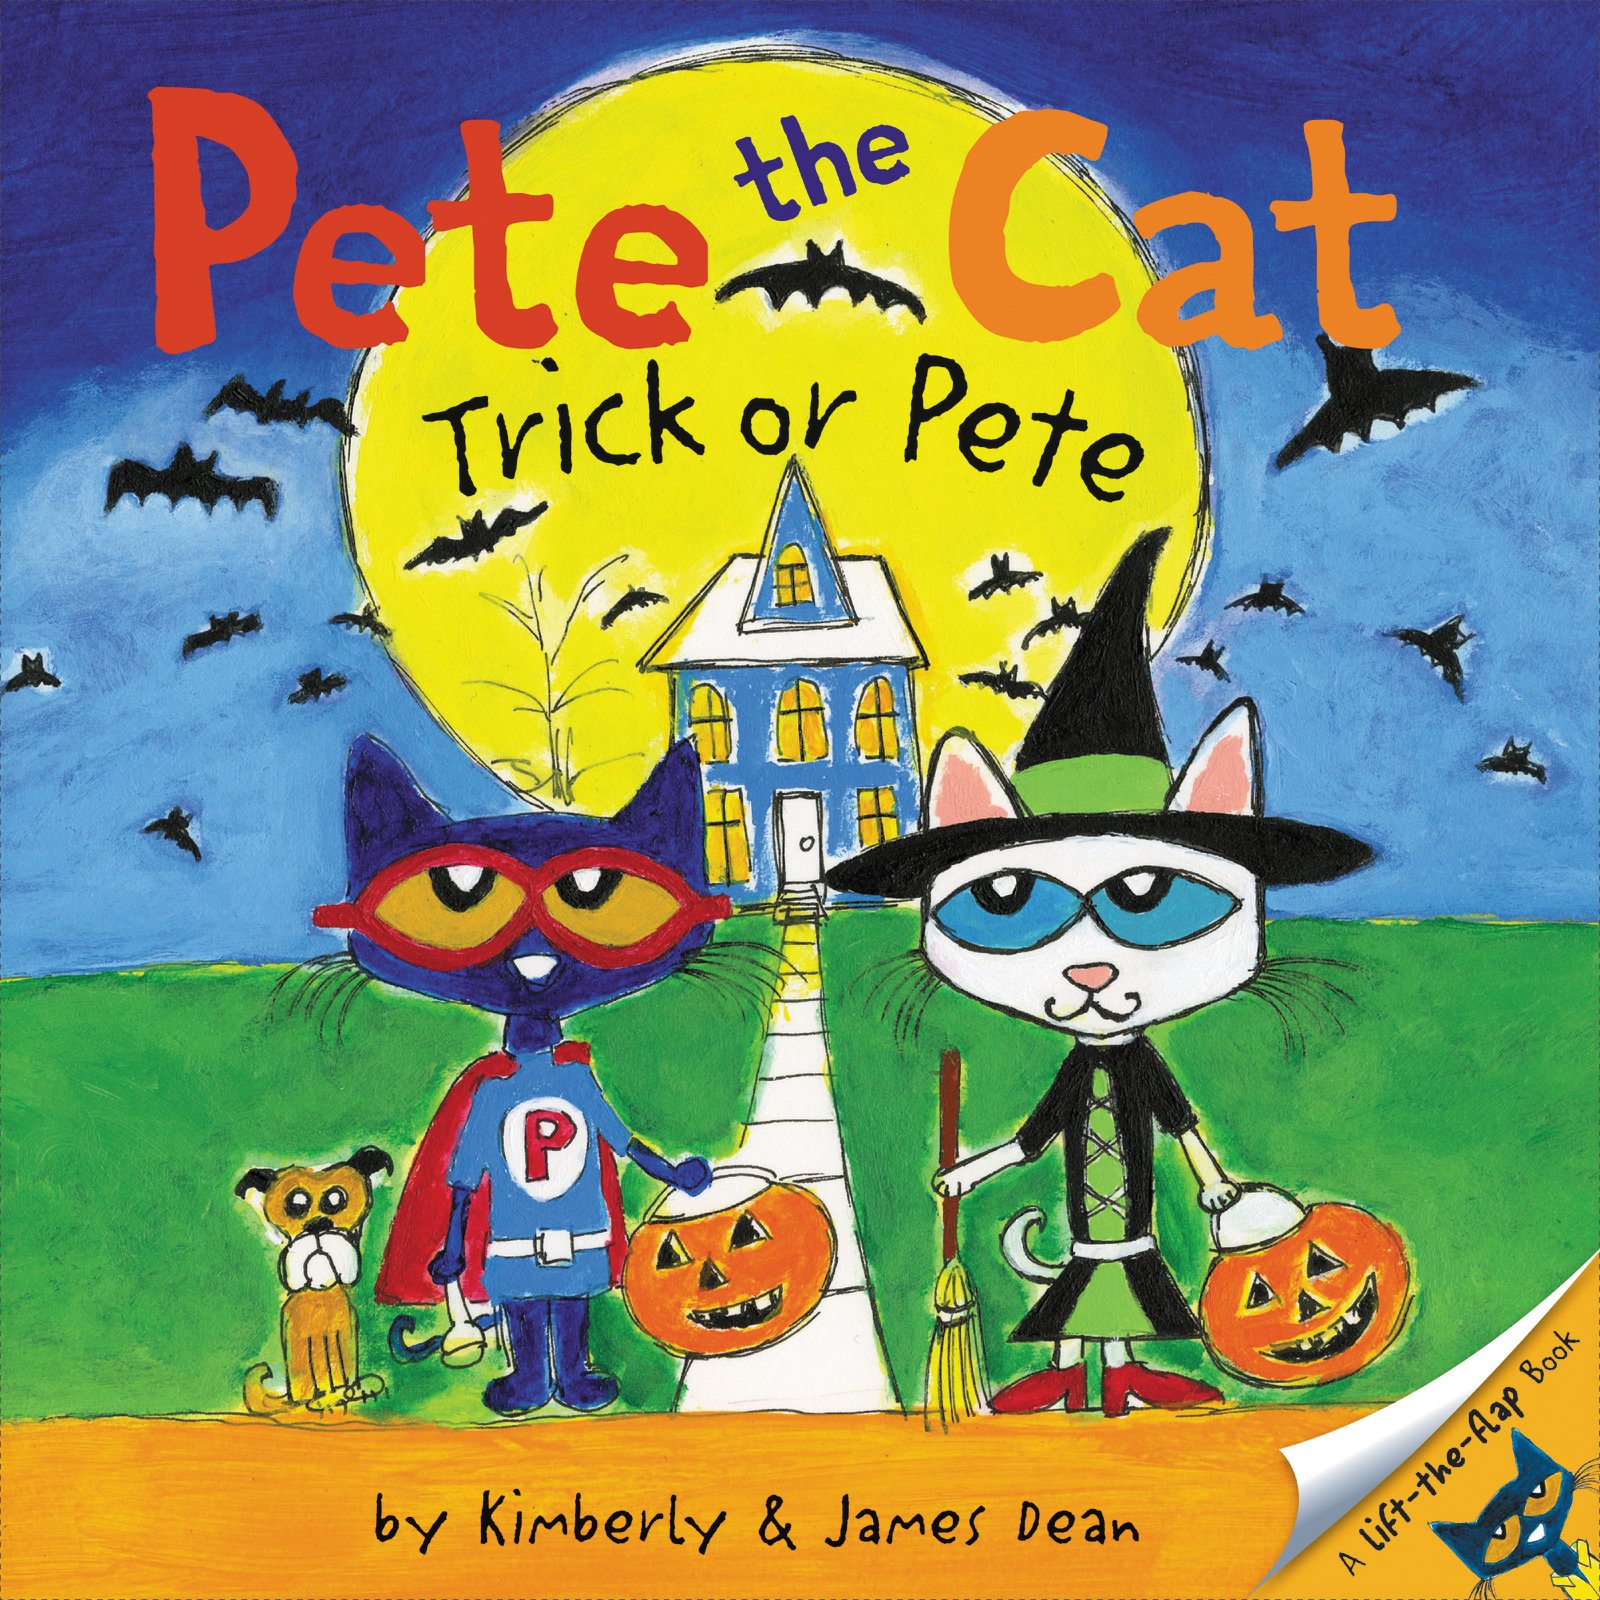 speech and language teaching concepts for pete the cat treat or Pete in speech therapy